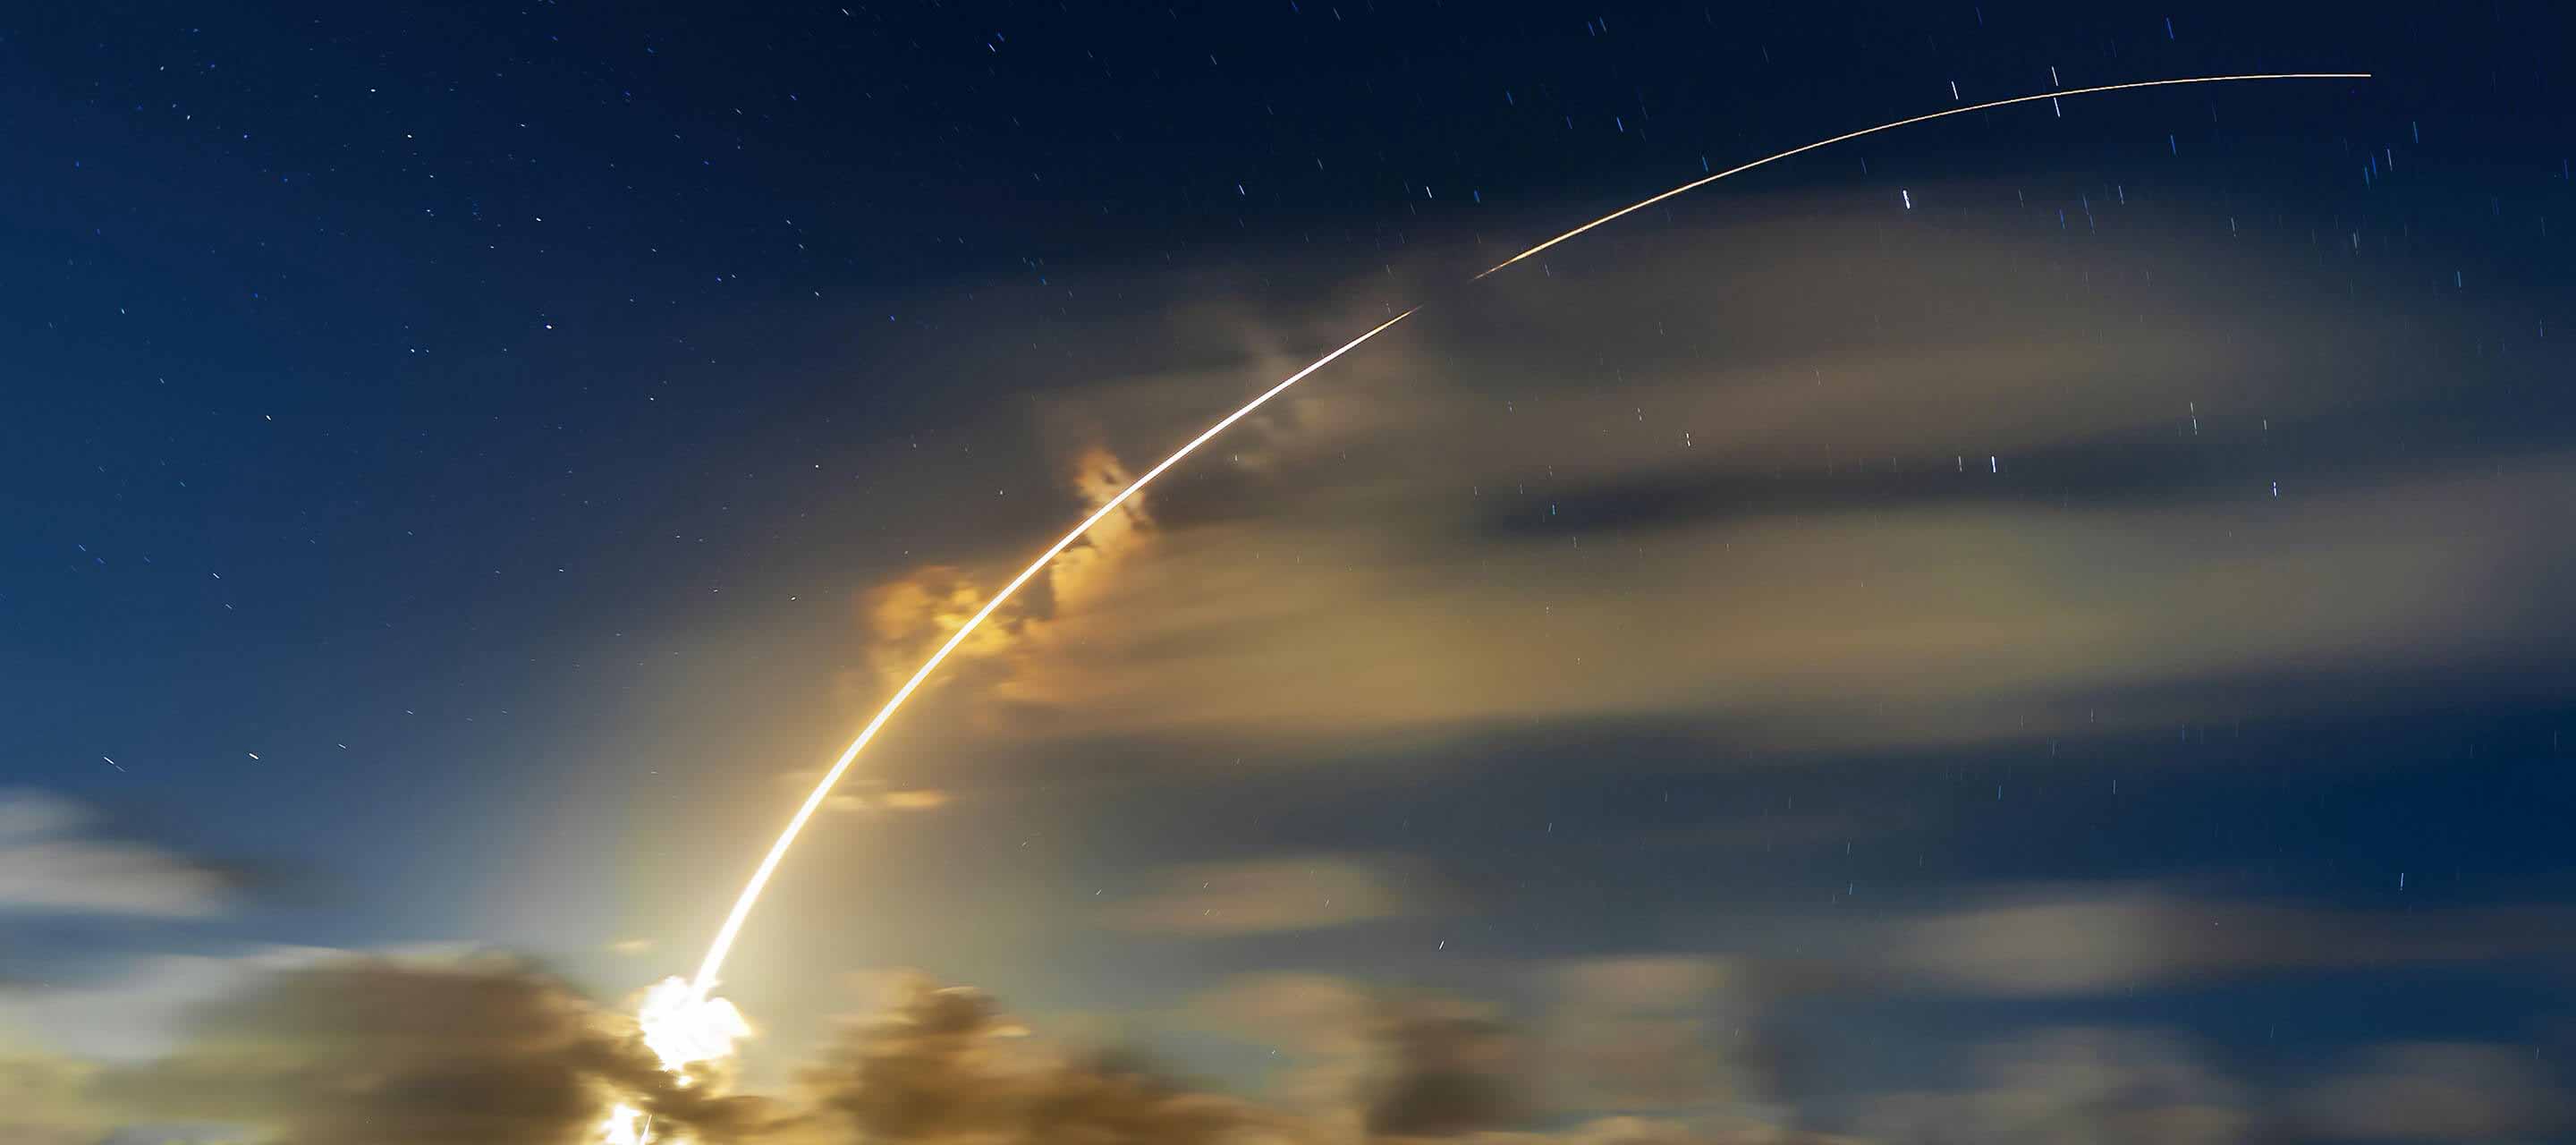 Rocket going into the sky at dusk